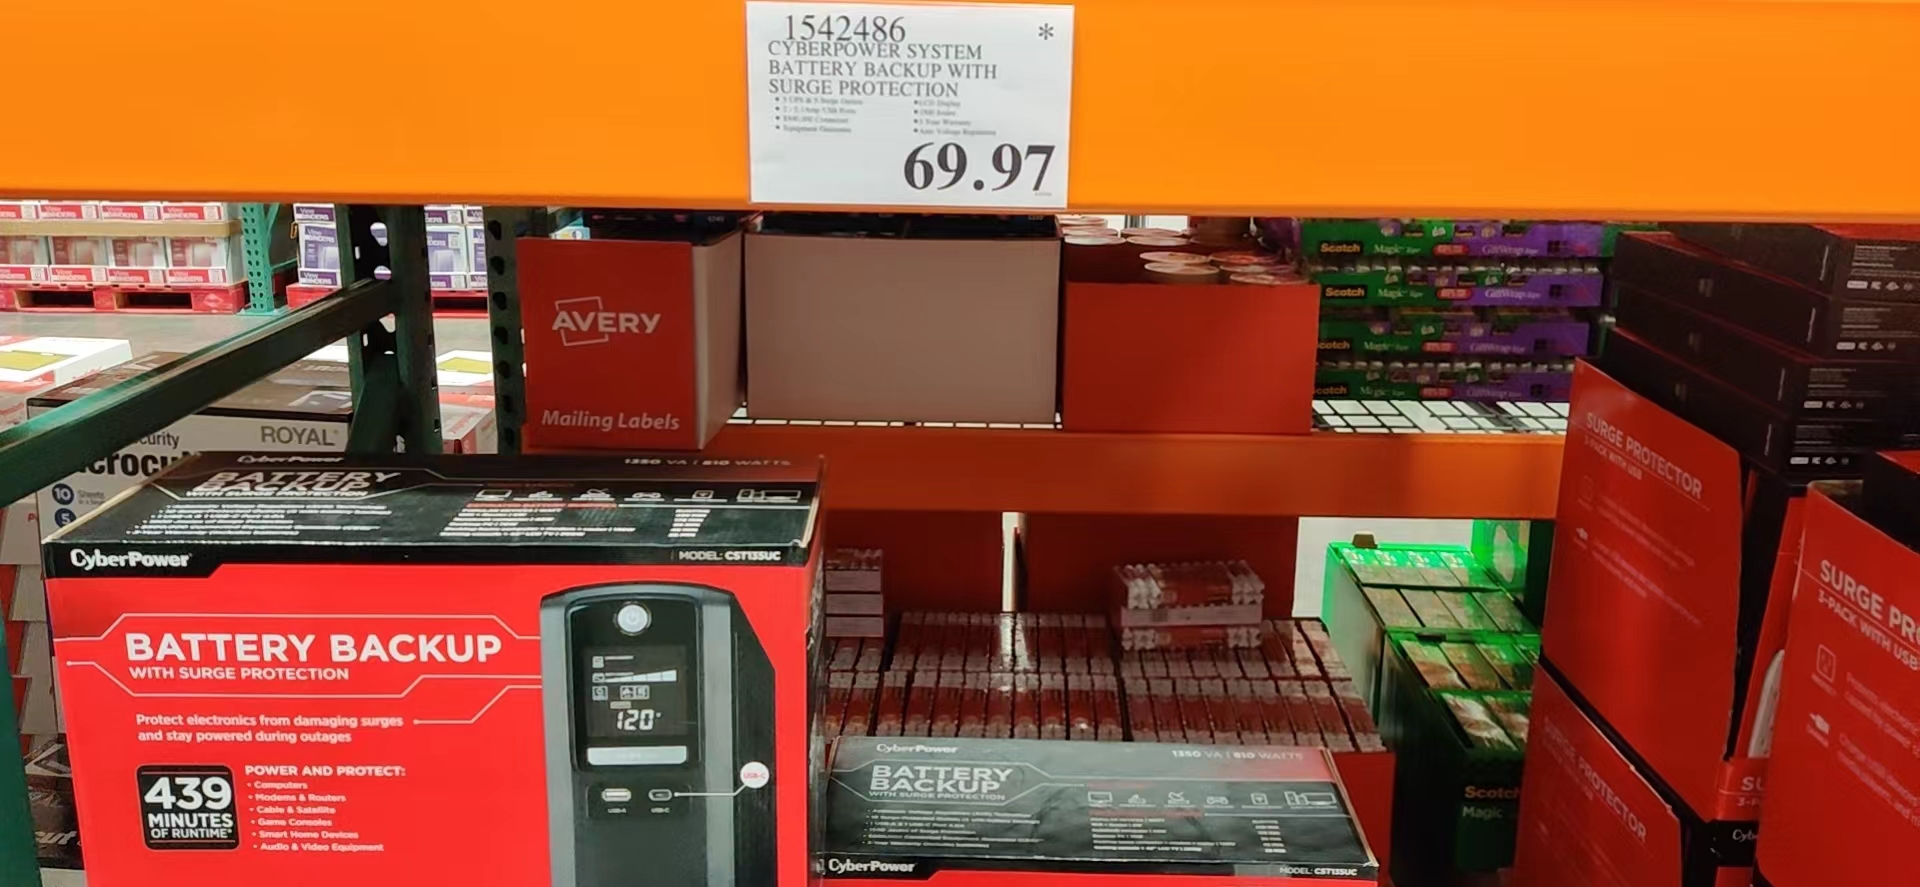 YMMV: Costco Business: CyberPower 1350VA Simulated Sine Wave UPS Battery Backup System $69.97